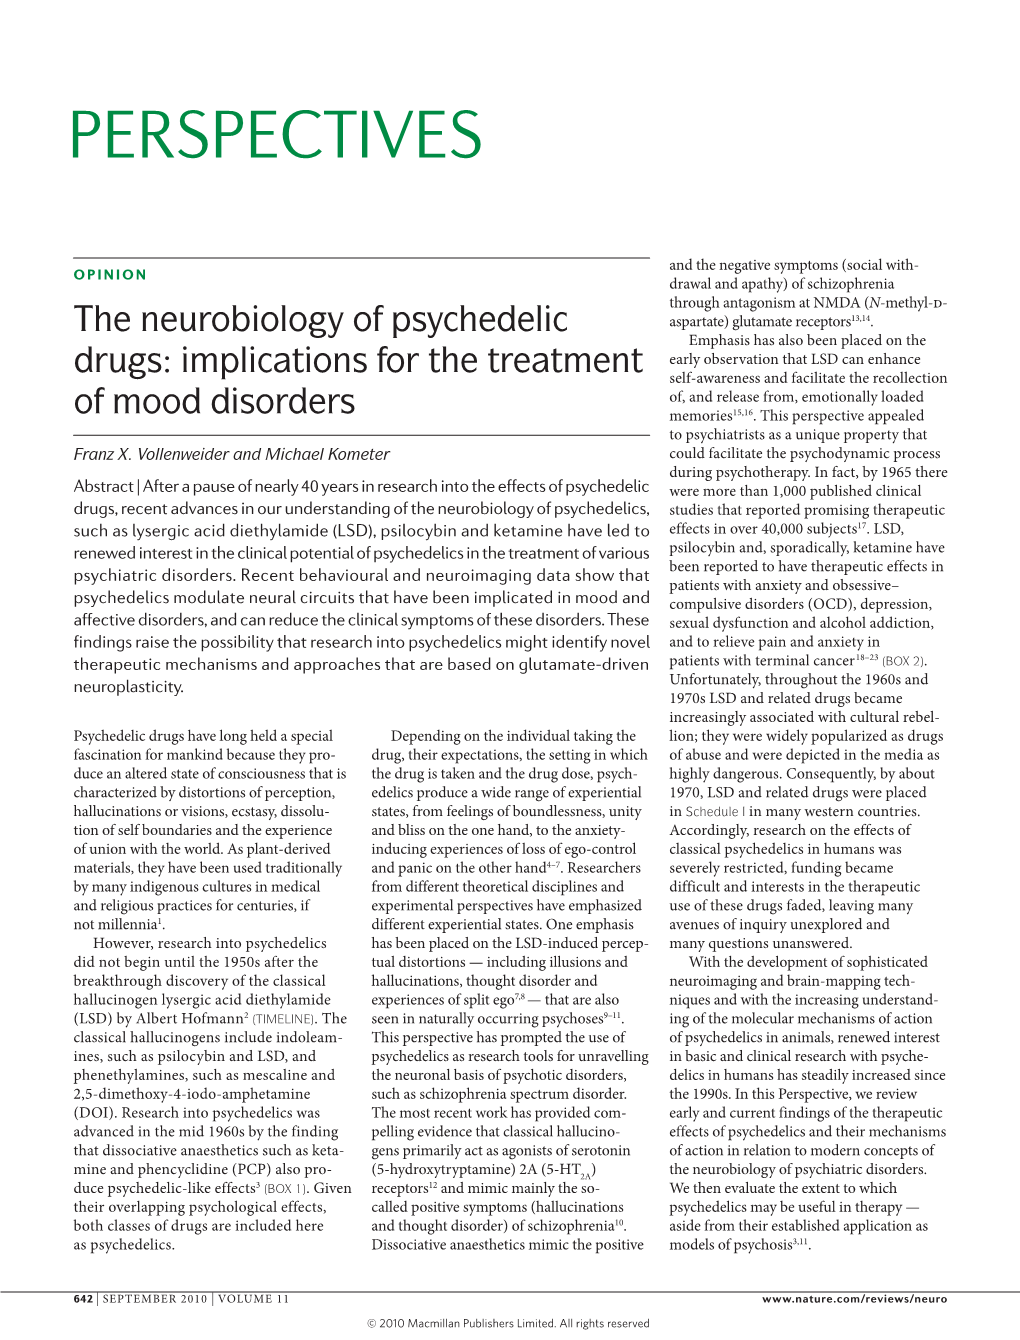 The Neurobiology of Psychedelic Drugs: Implications for the Treatment